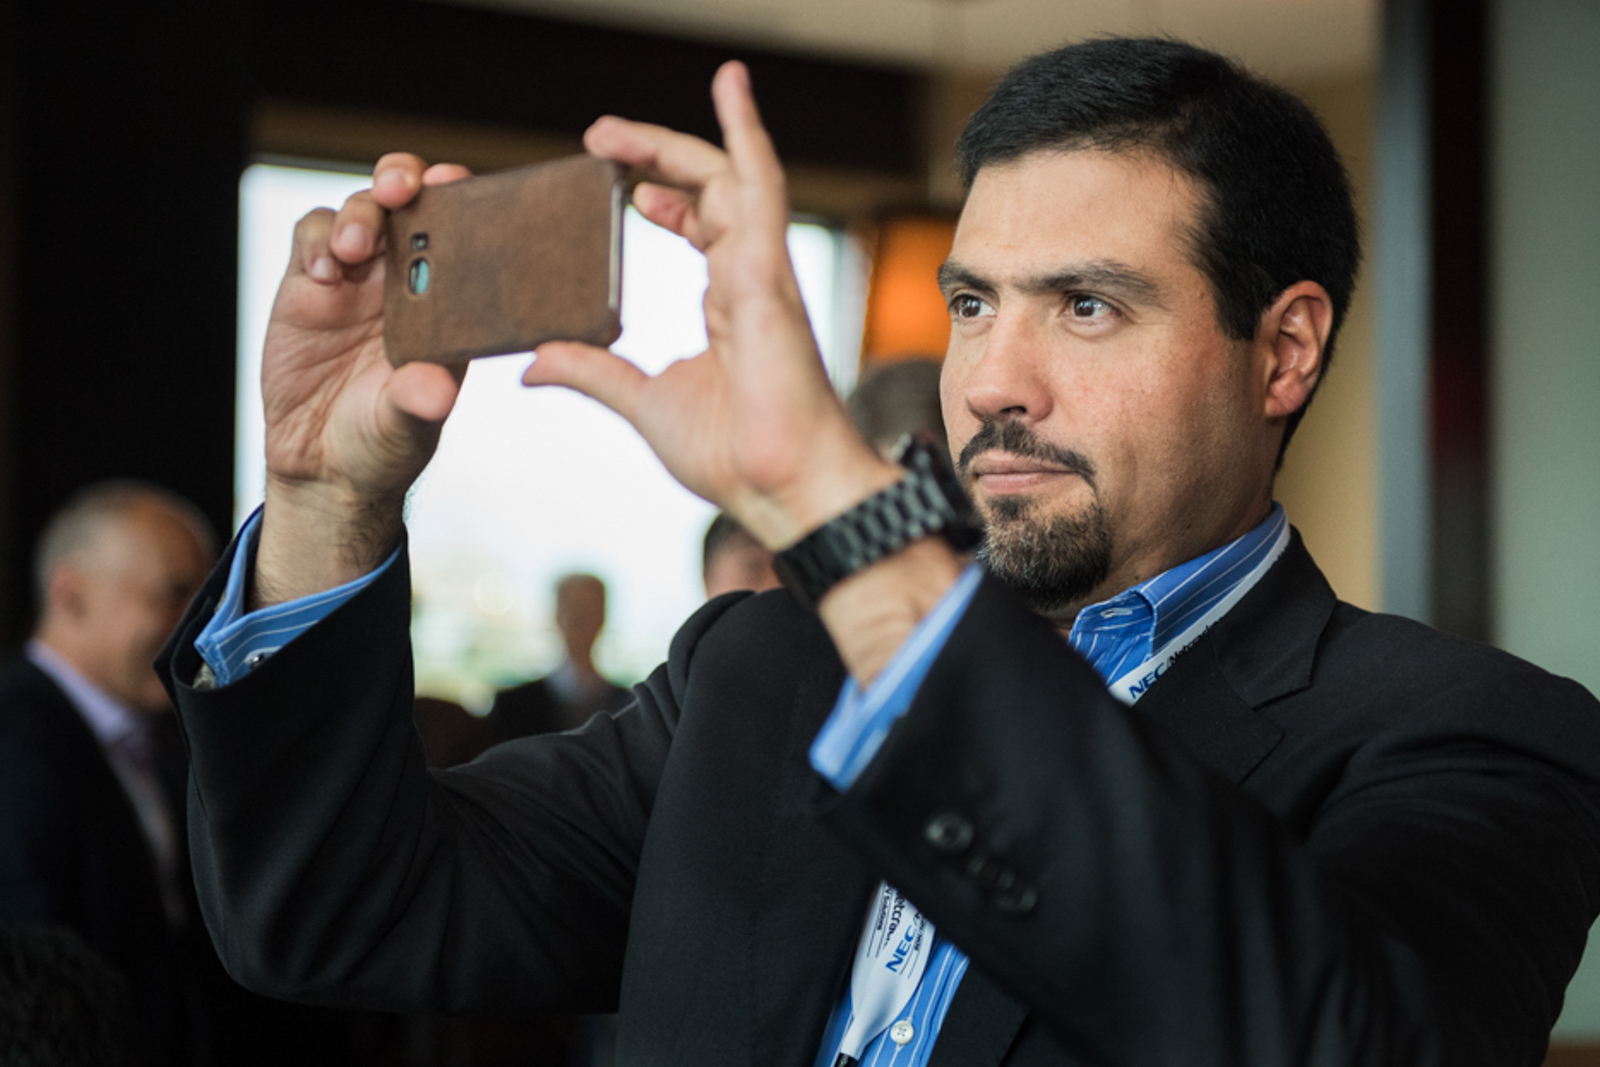 Candid image of man in a business gathering taking a cellphone photo